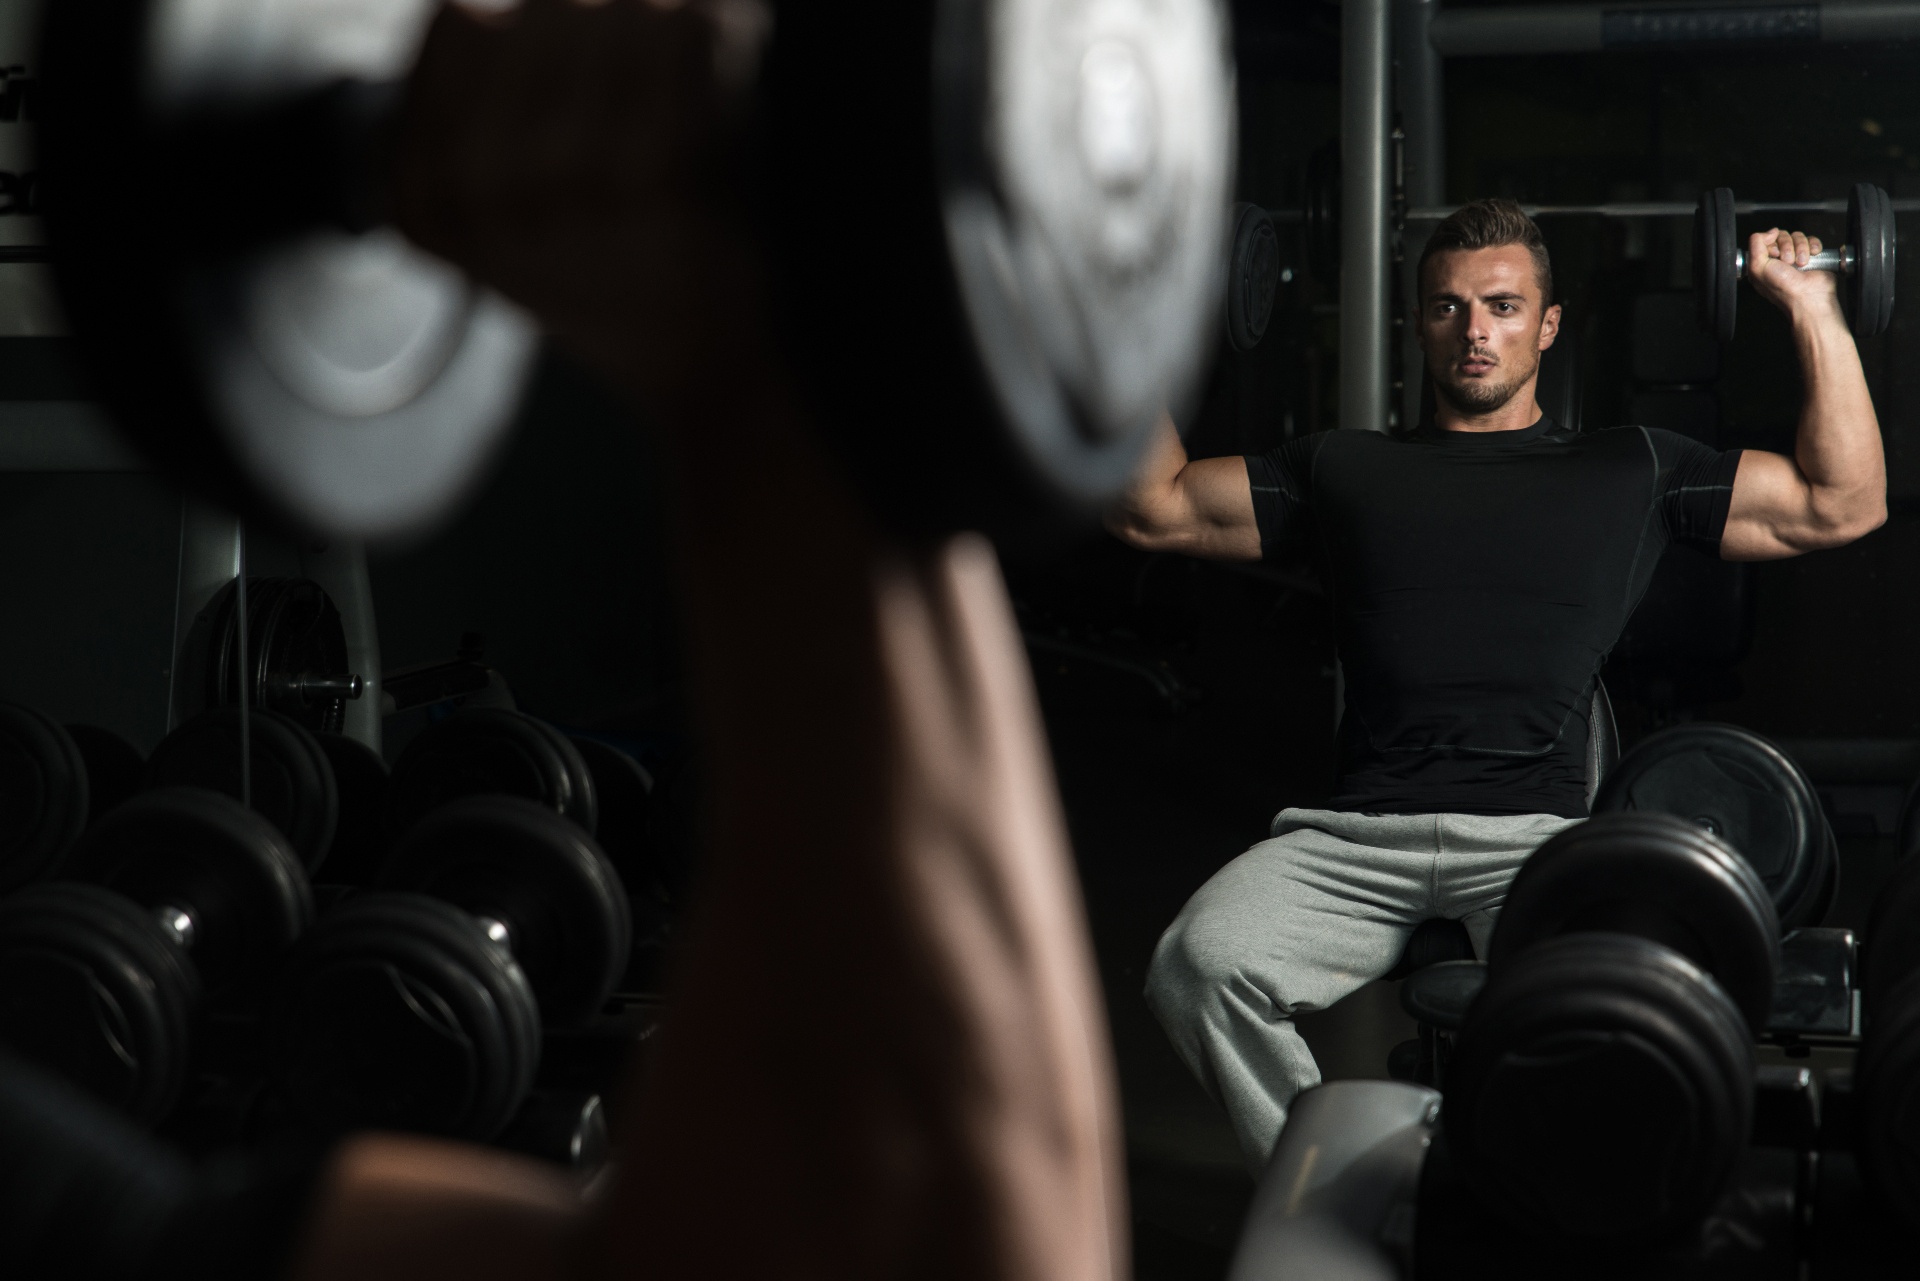 A man looks at himself in a mirror while lifting weights. A body image counselor in Delray Beach, FL can offer support with body dysmorphia treatment in Delray Beach, FL and other services. Search counseling for body image issues in Palm Beach County, FL to learn more.